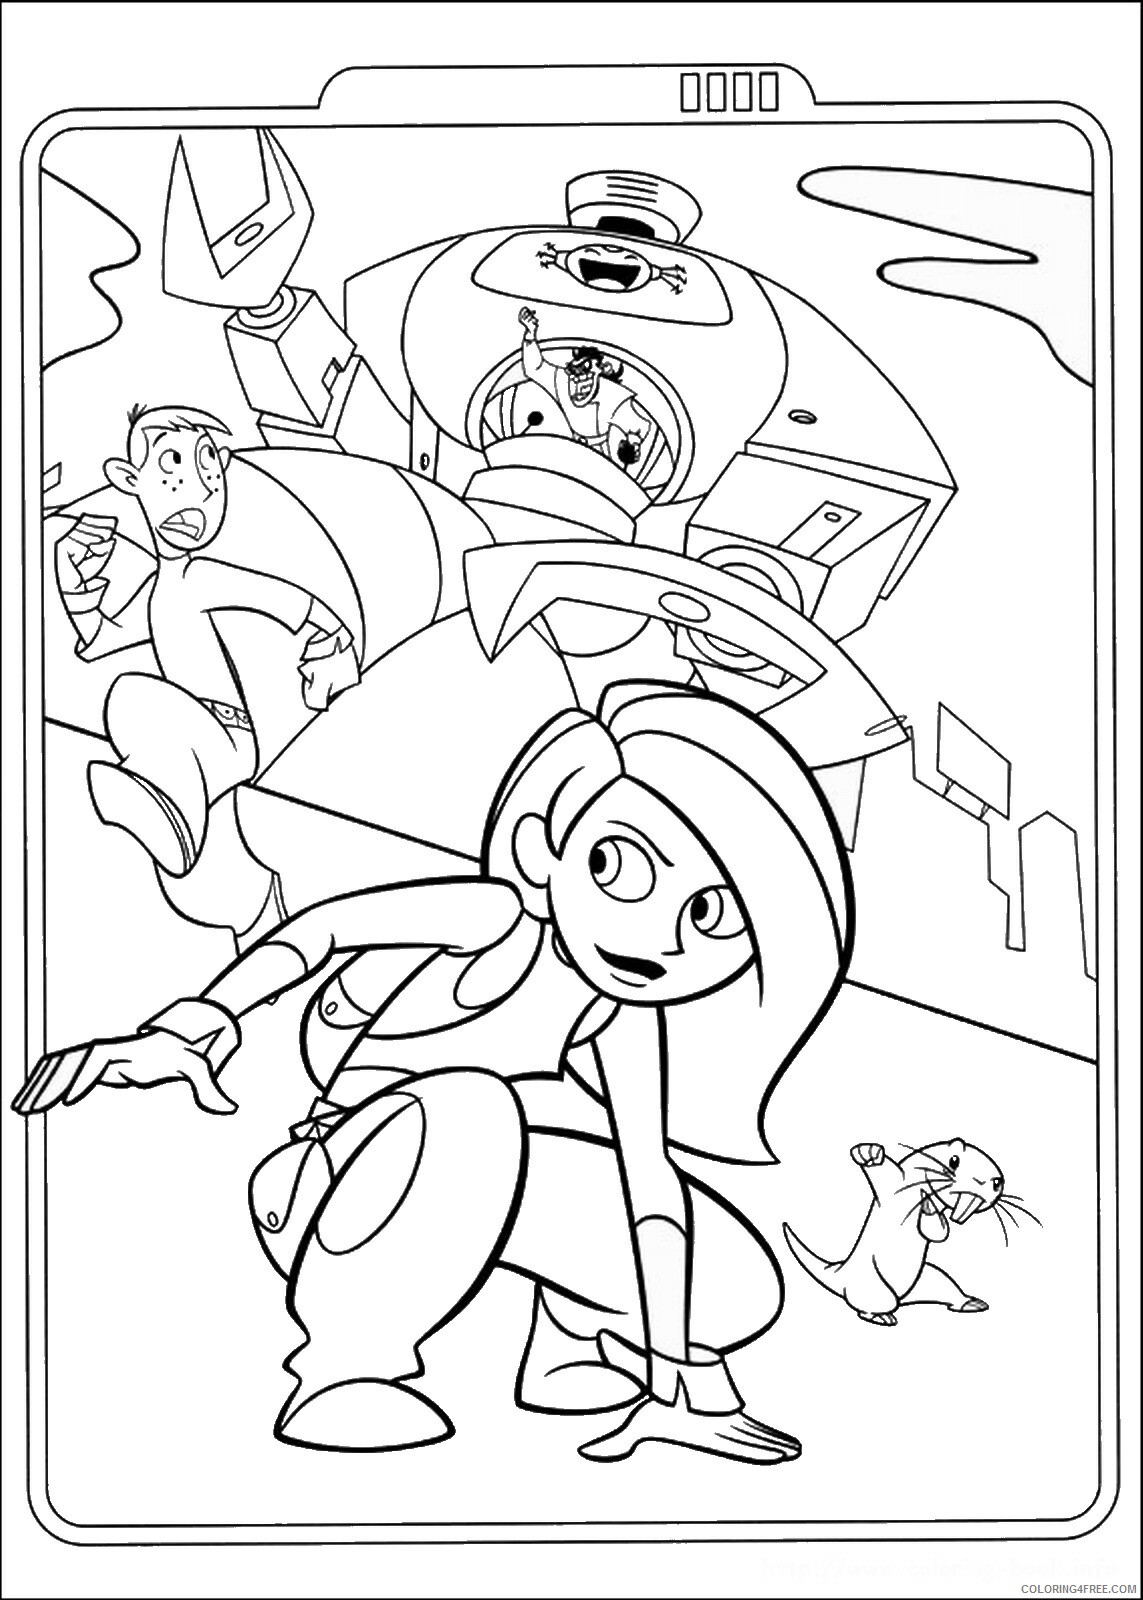 Kim Possible Coloring Pages TV Film kim possible_cl_06 Printable 2020 04241 Coloring4free